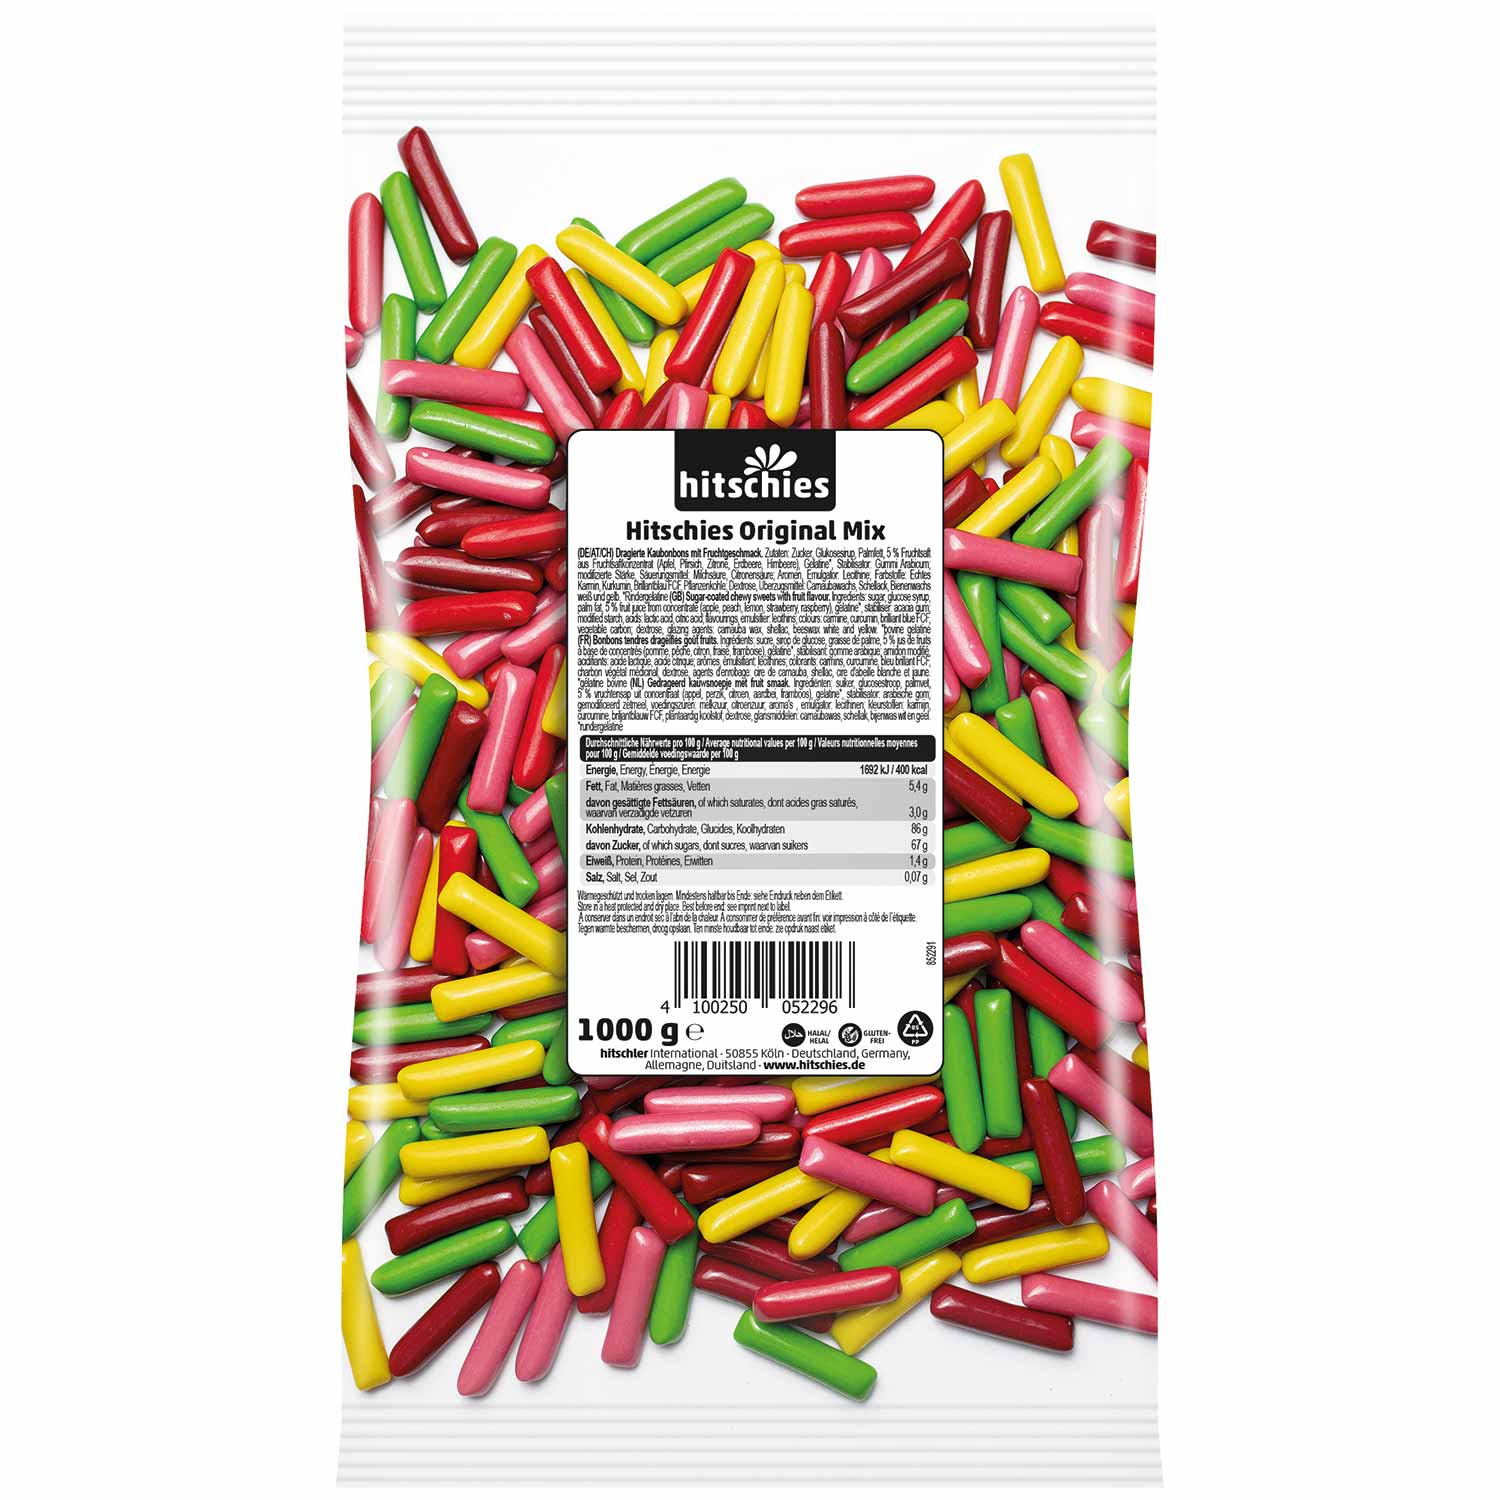 hitschies Fruity Chewing Candy Original Mix 1kg / 2.2lbs